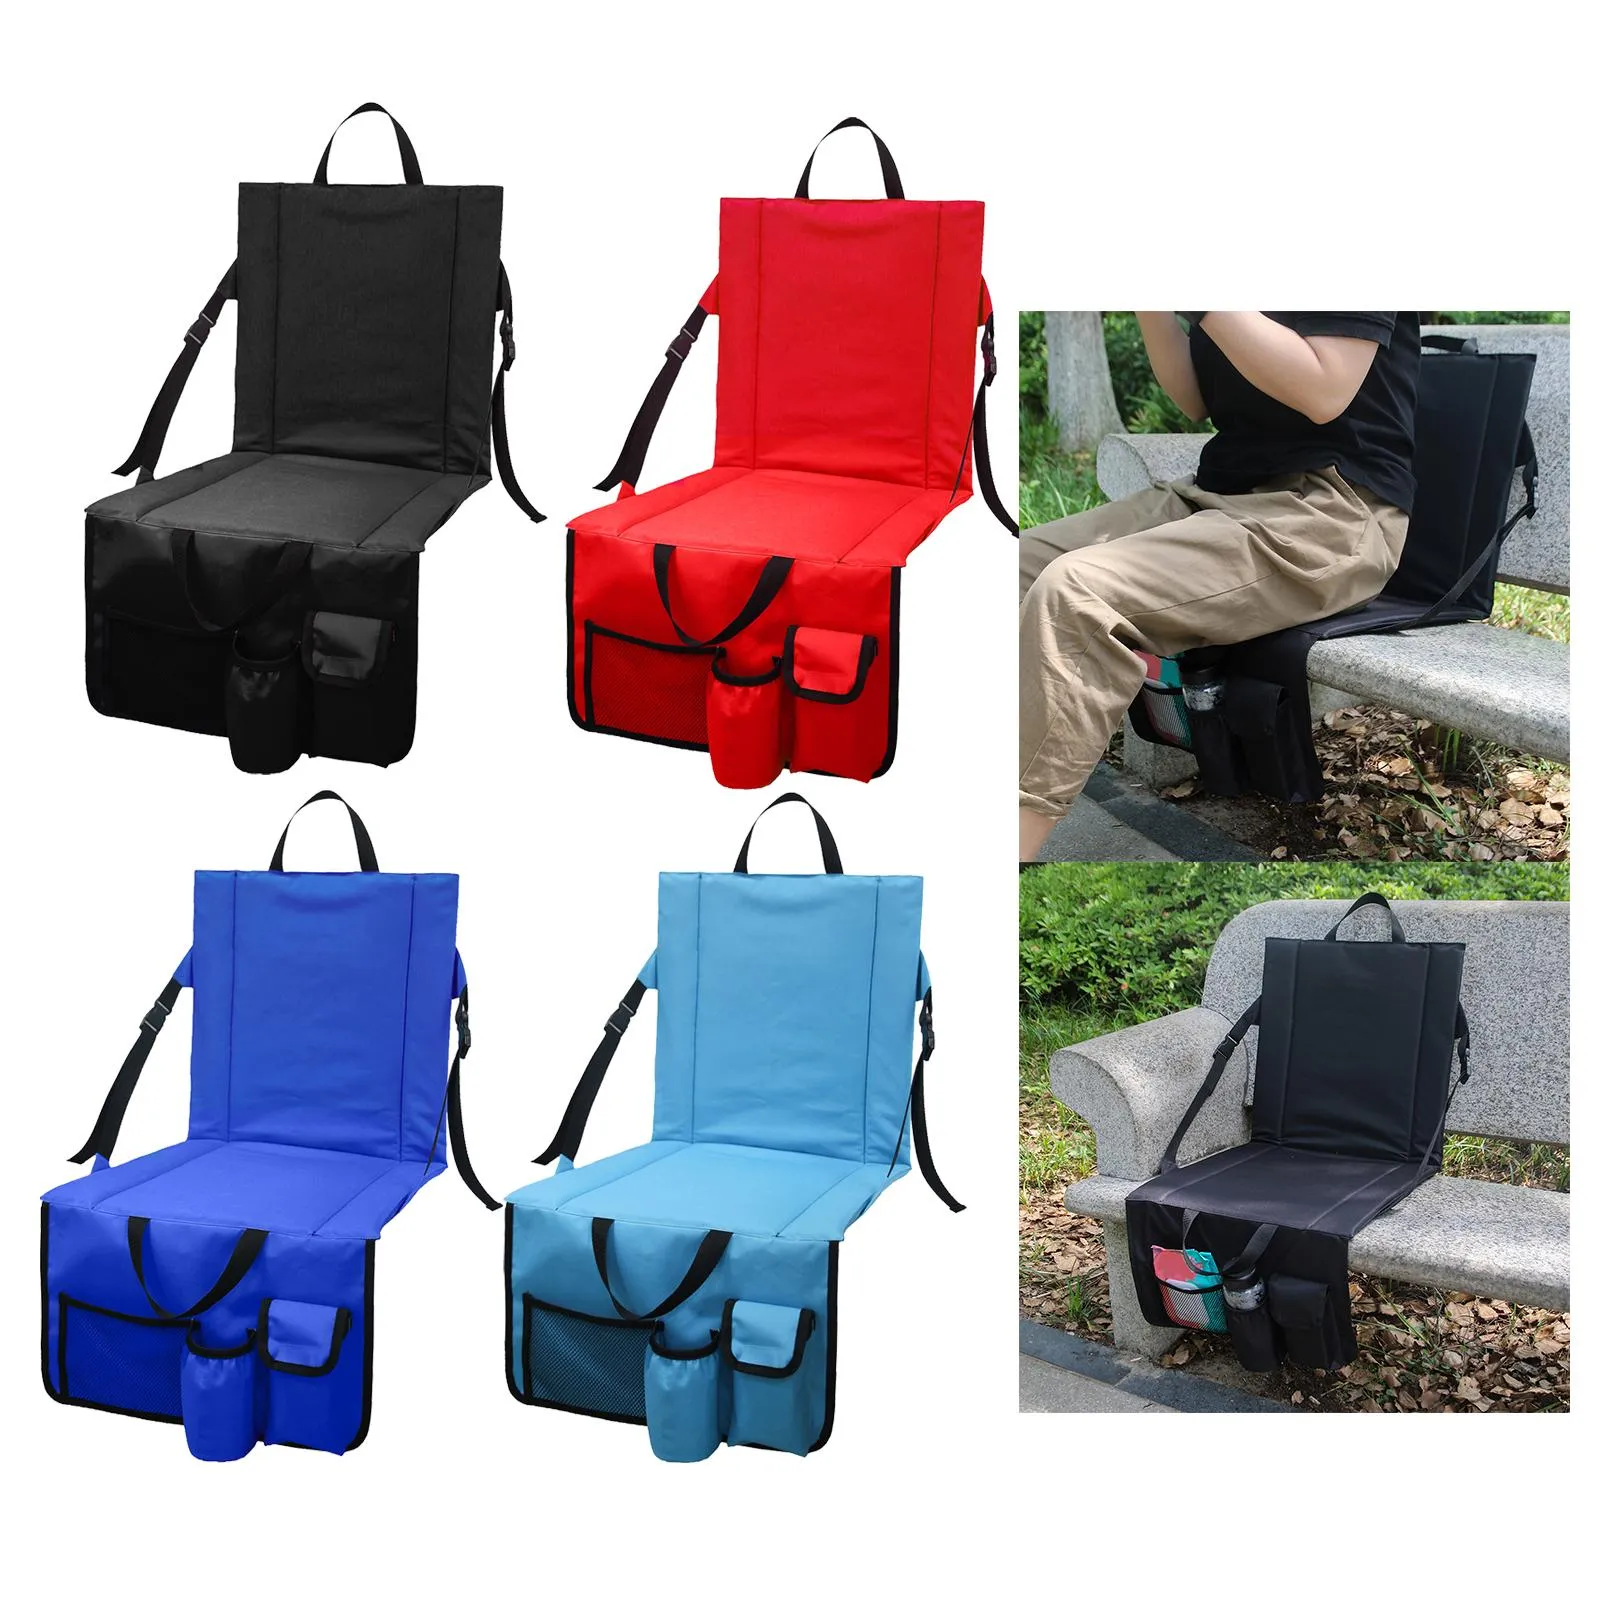 Comfortable Stadium Chair, with Extra Padding for Outdoor Events